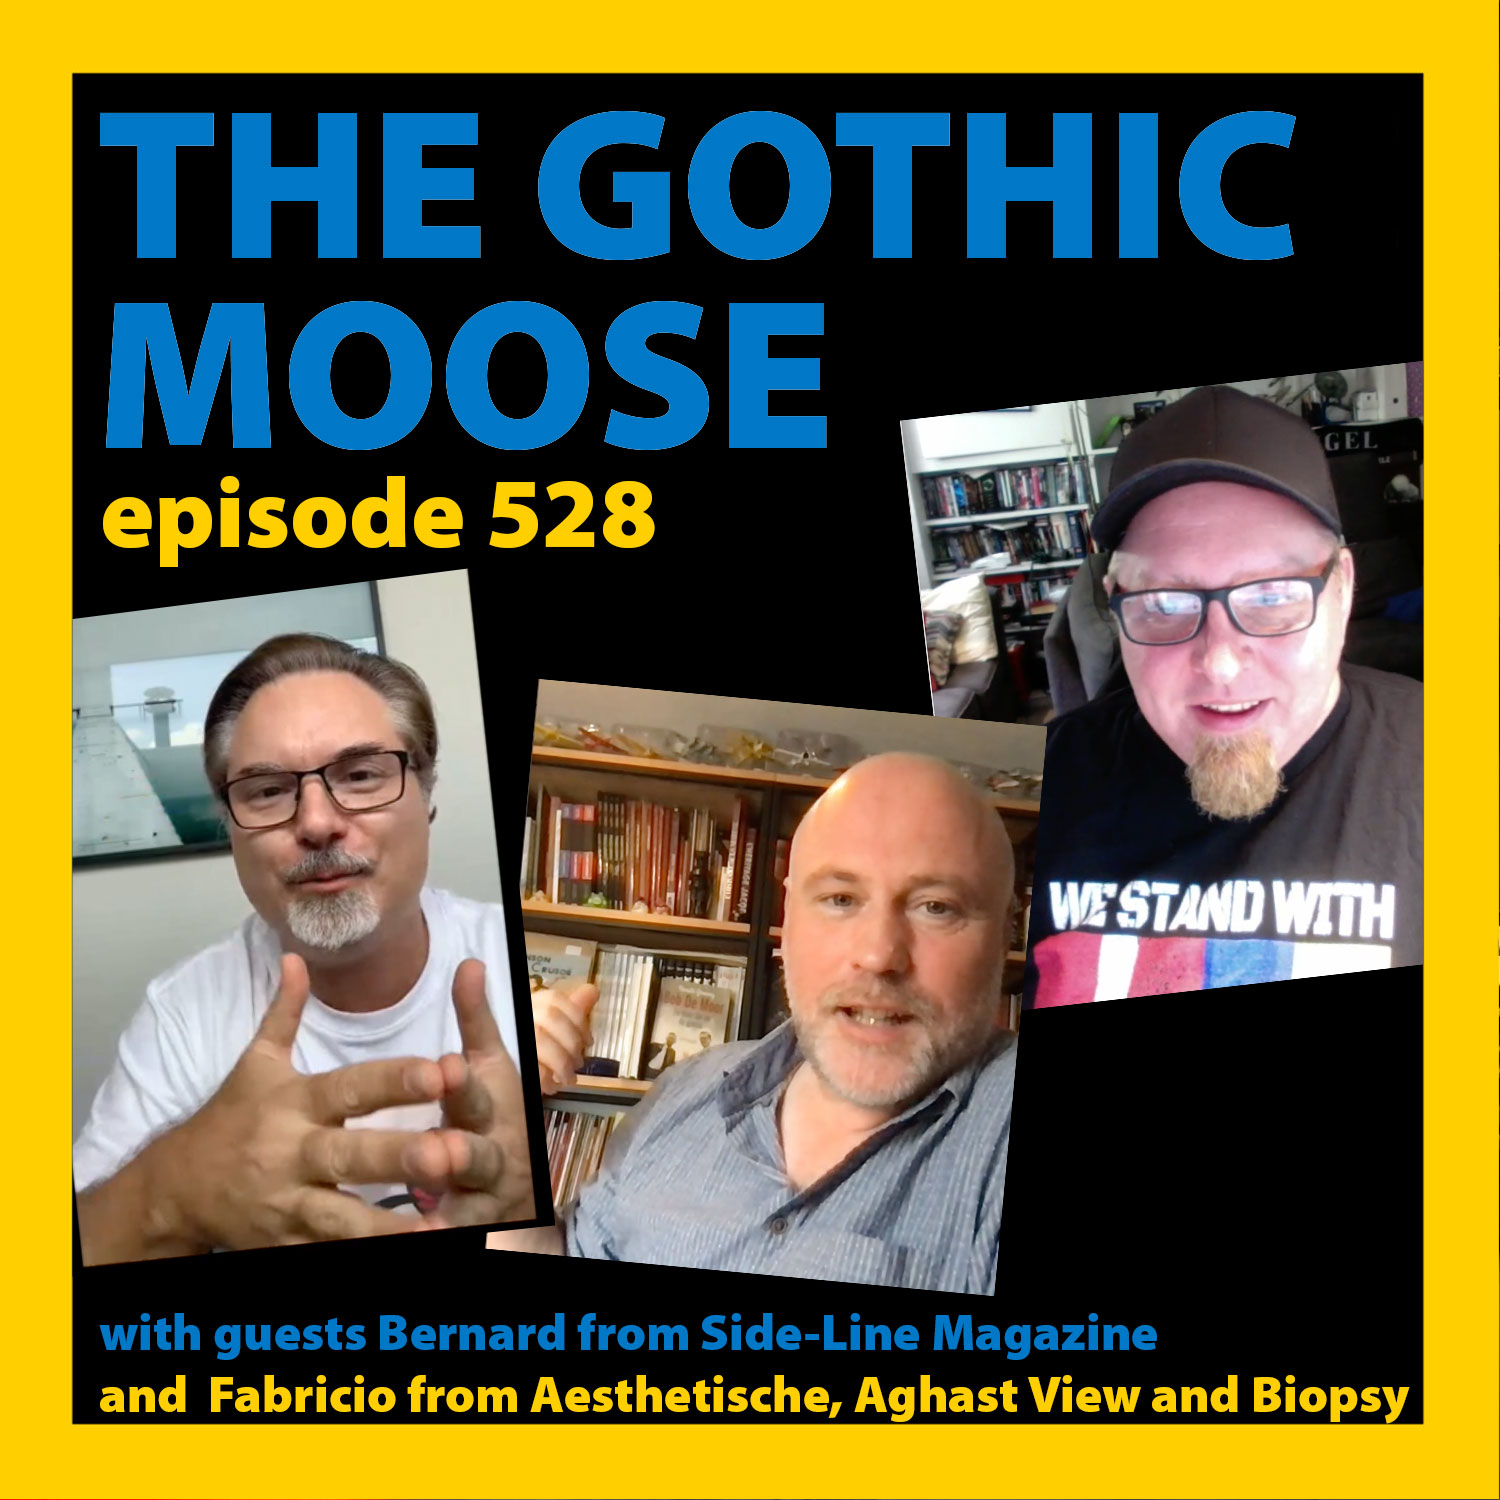 The Gothic Moose – Episode 528 – with guests Fabricio (Aesthetische) and Bernard (Side-Line)